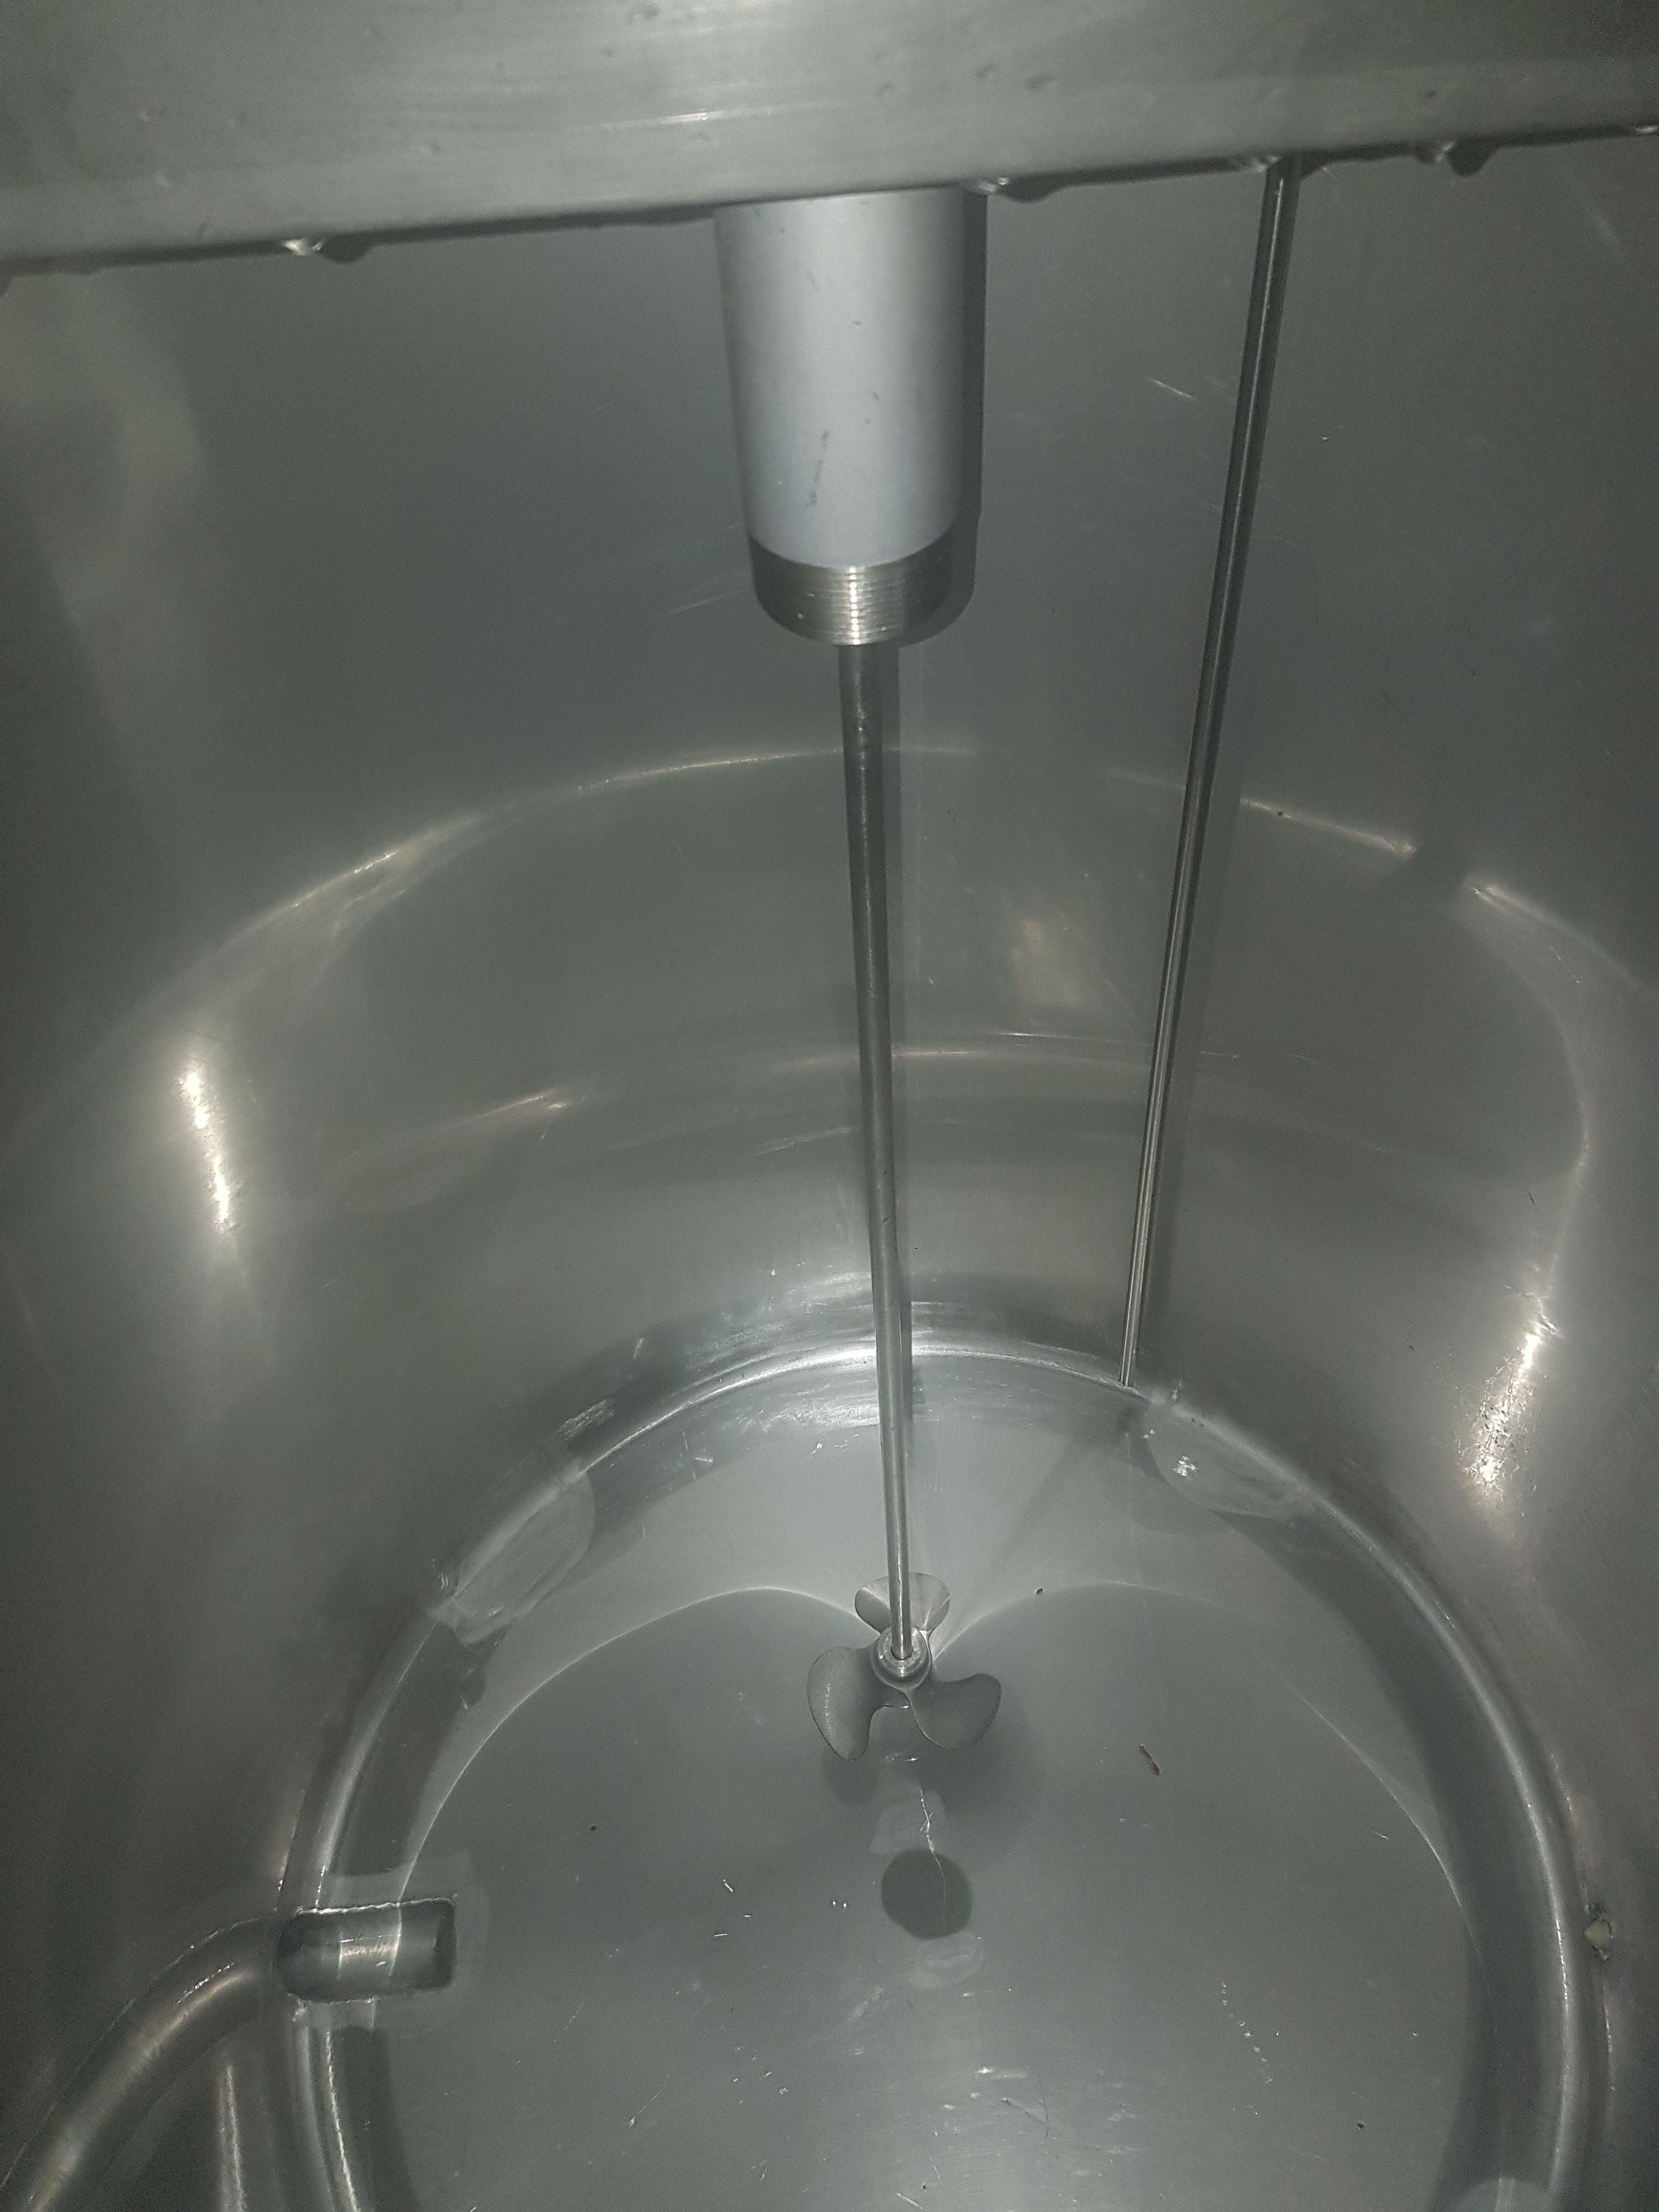 Impellers mixing inside a stainless steel drum.